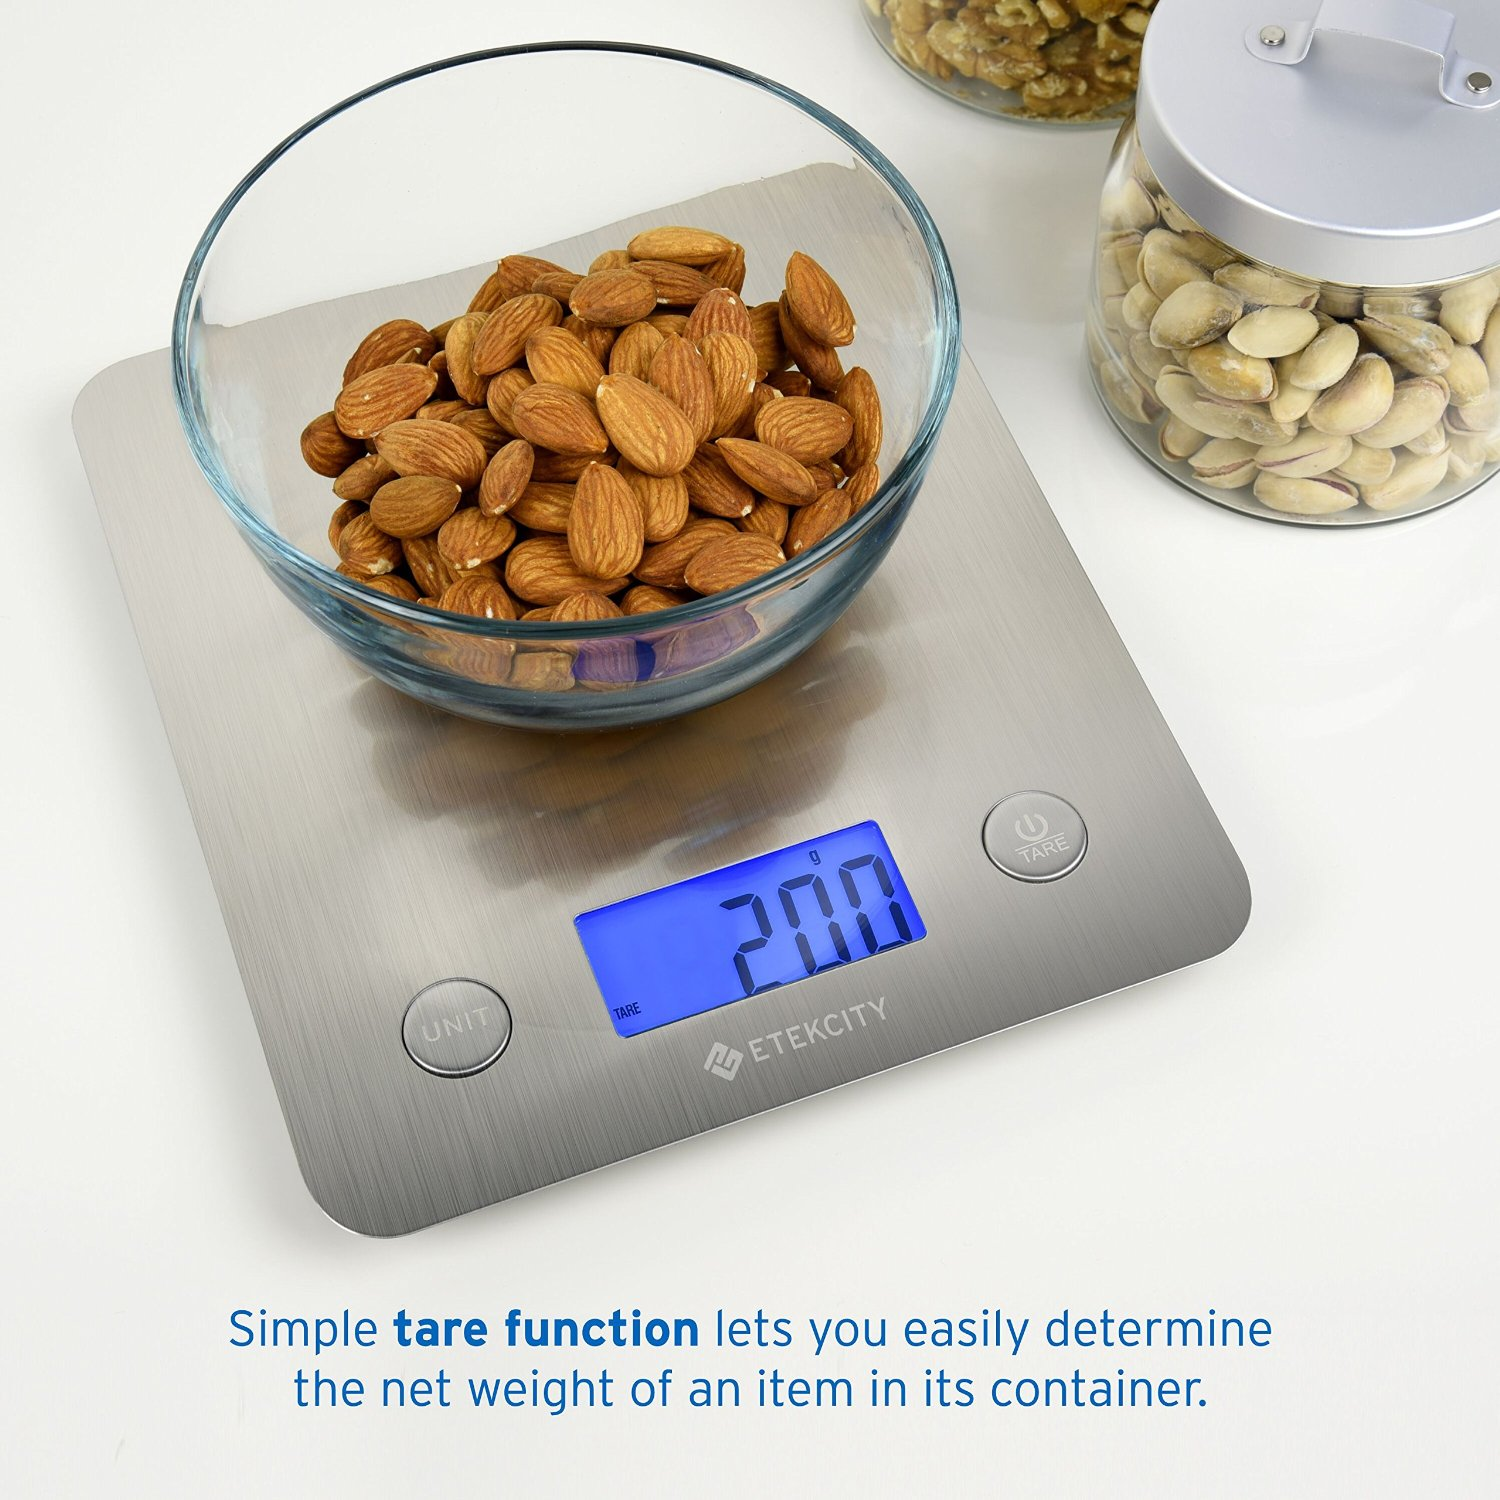 Stainless Steel Kitchen Scale Only $10.99 on Amazon! (Reg $28.99)